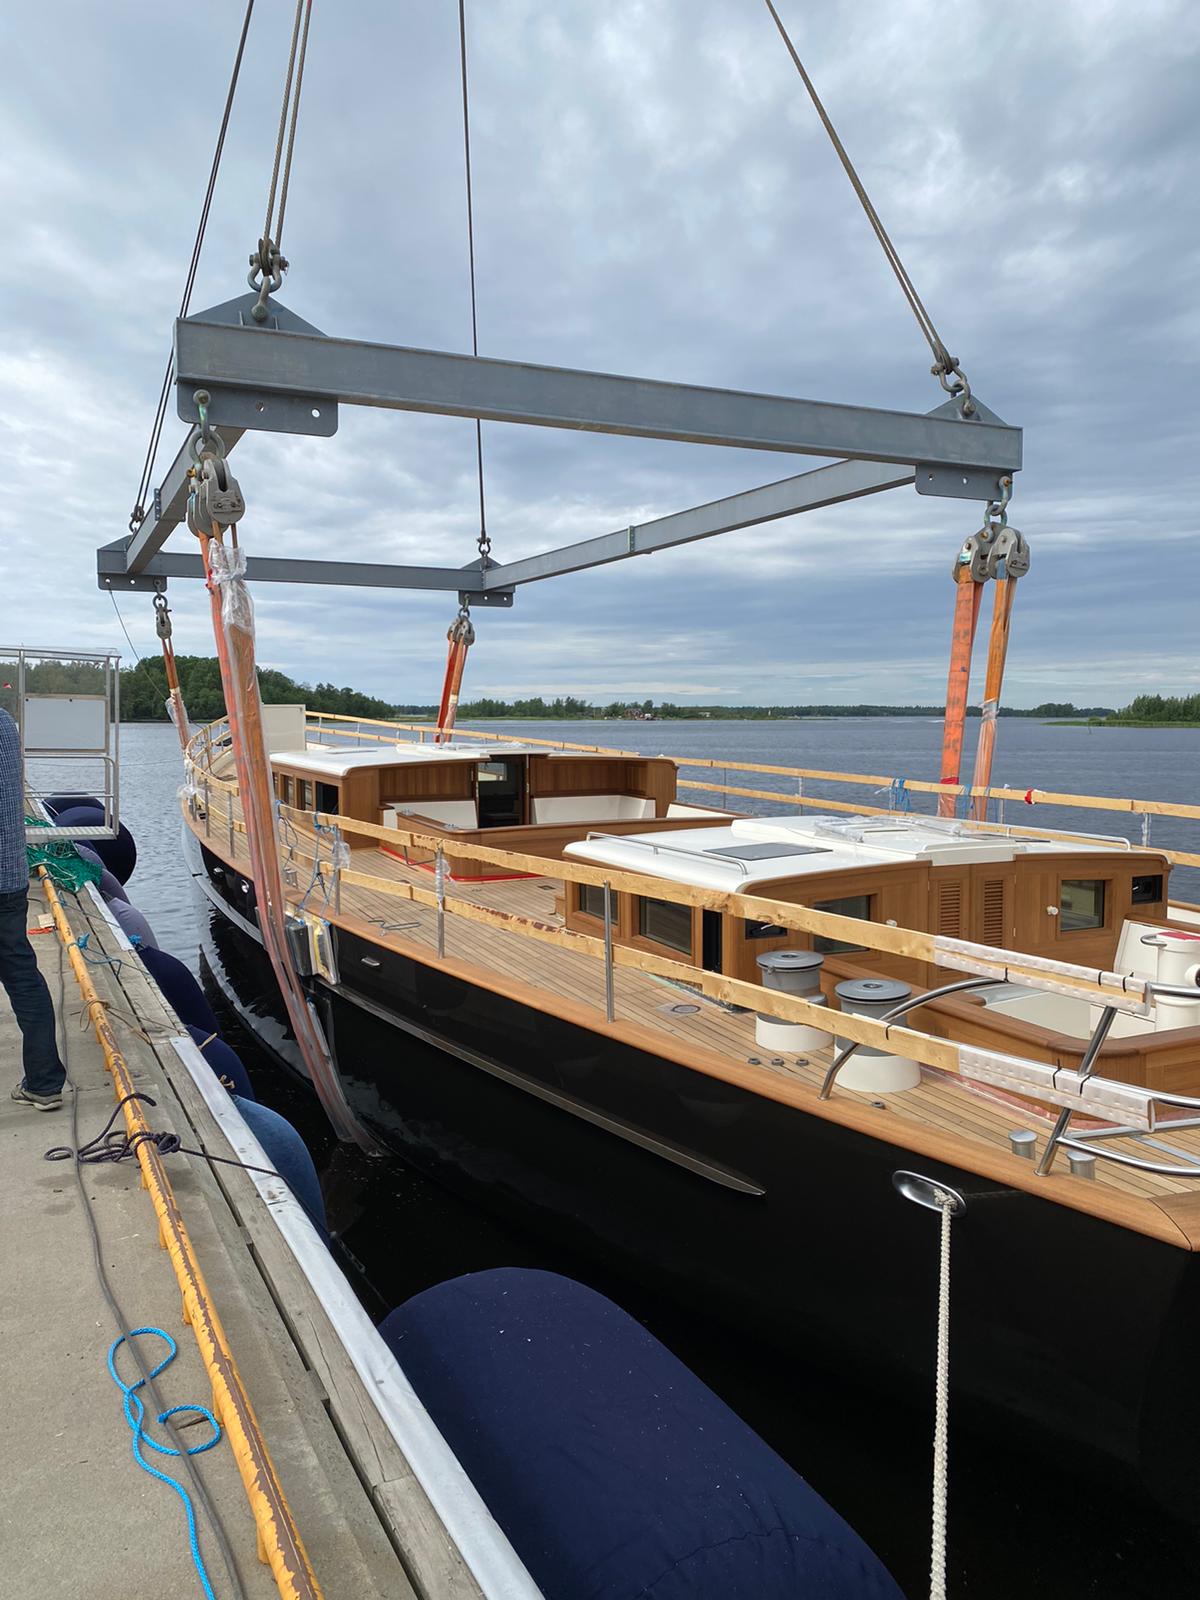 Baltic Yachts is a leading yard in Jakostad, Finland